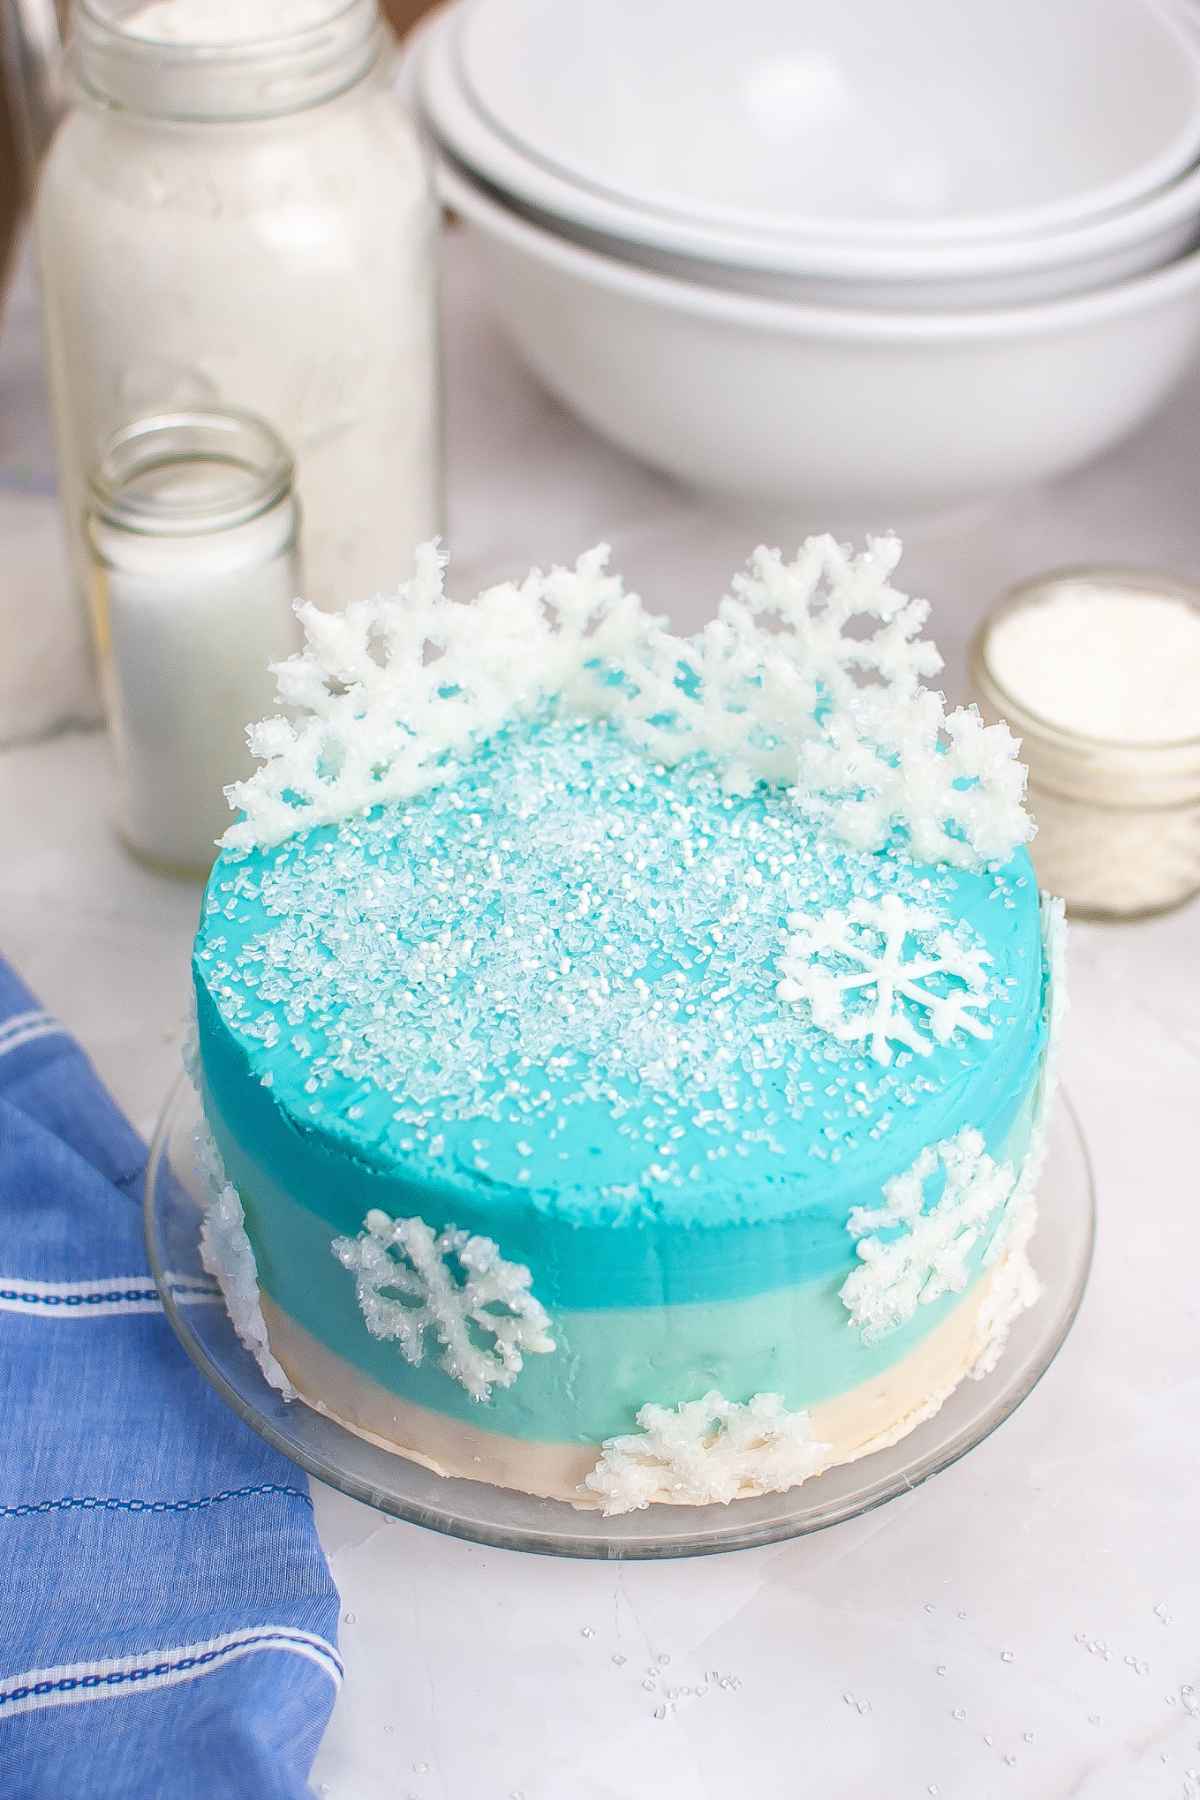 Angled image of winter wonderland cake with ombre blue frosting and sparkling white chocolate snowflakes.